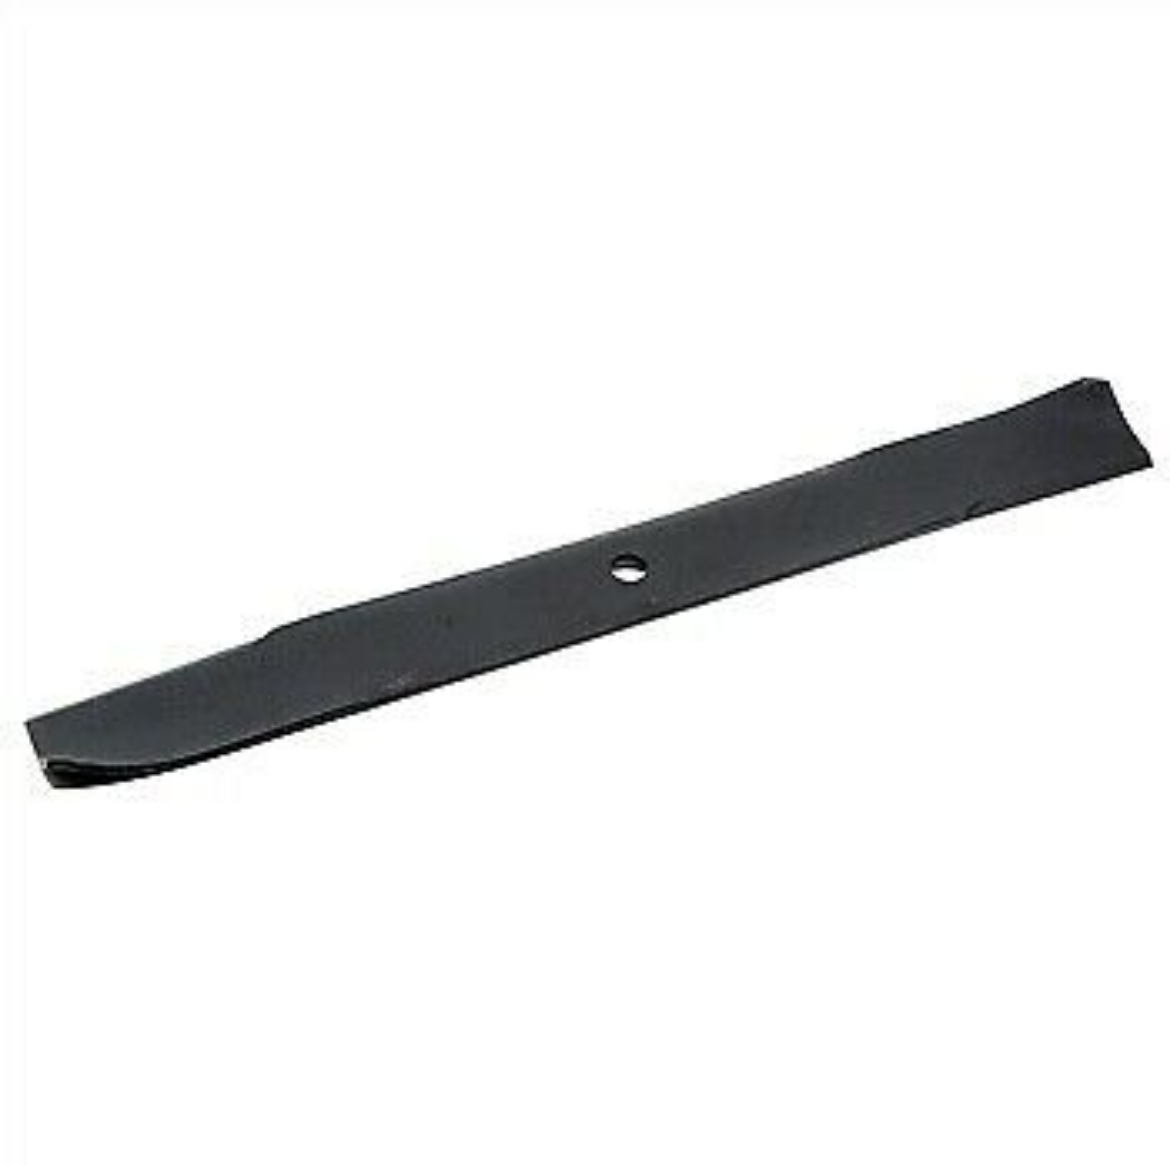 Picture of 21.6" Recycler/Mulching Blade to suit 42" Toro Mowers (2 Required)